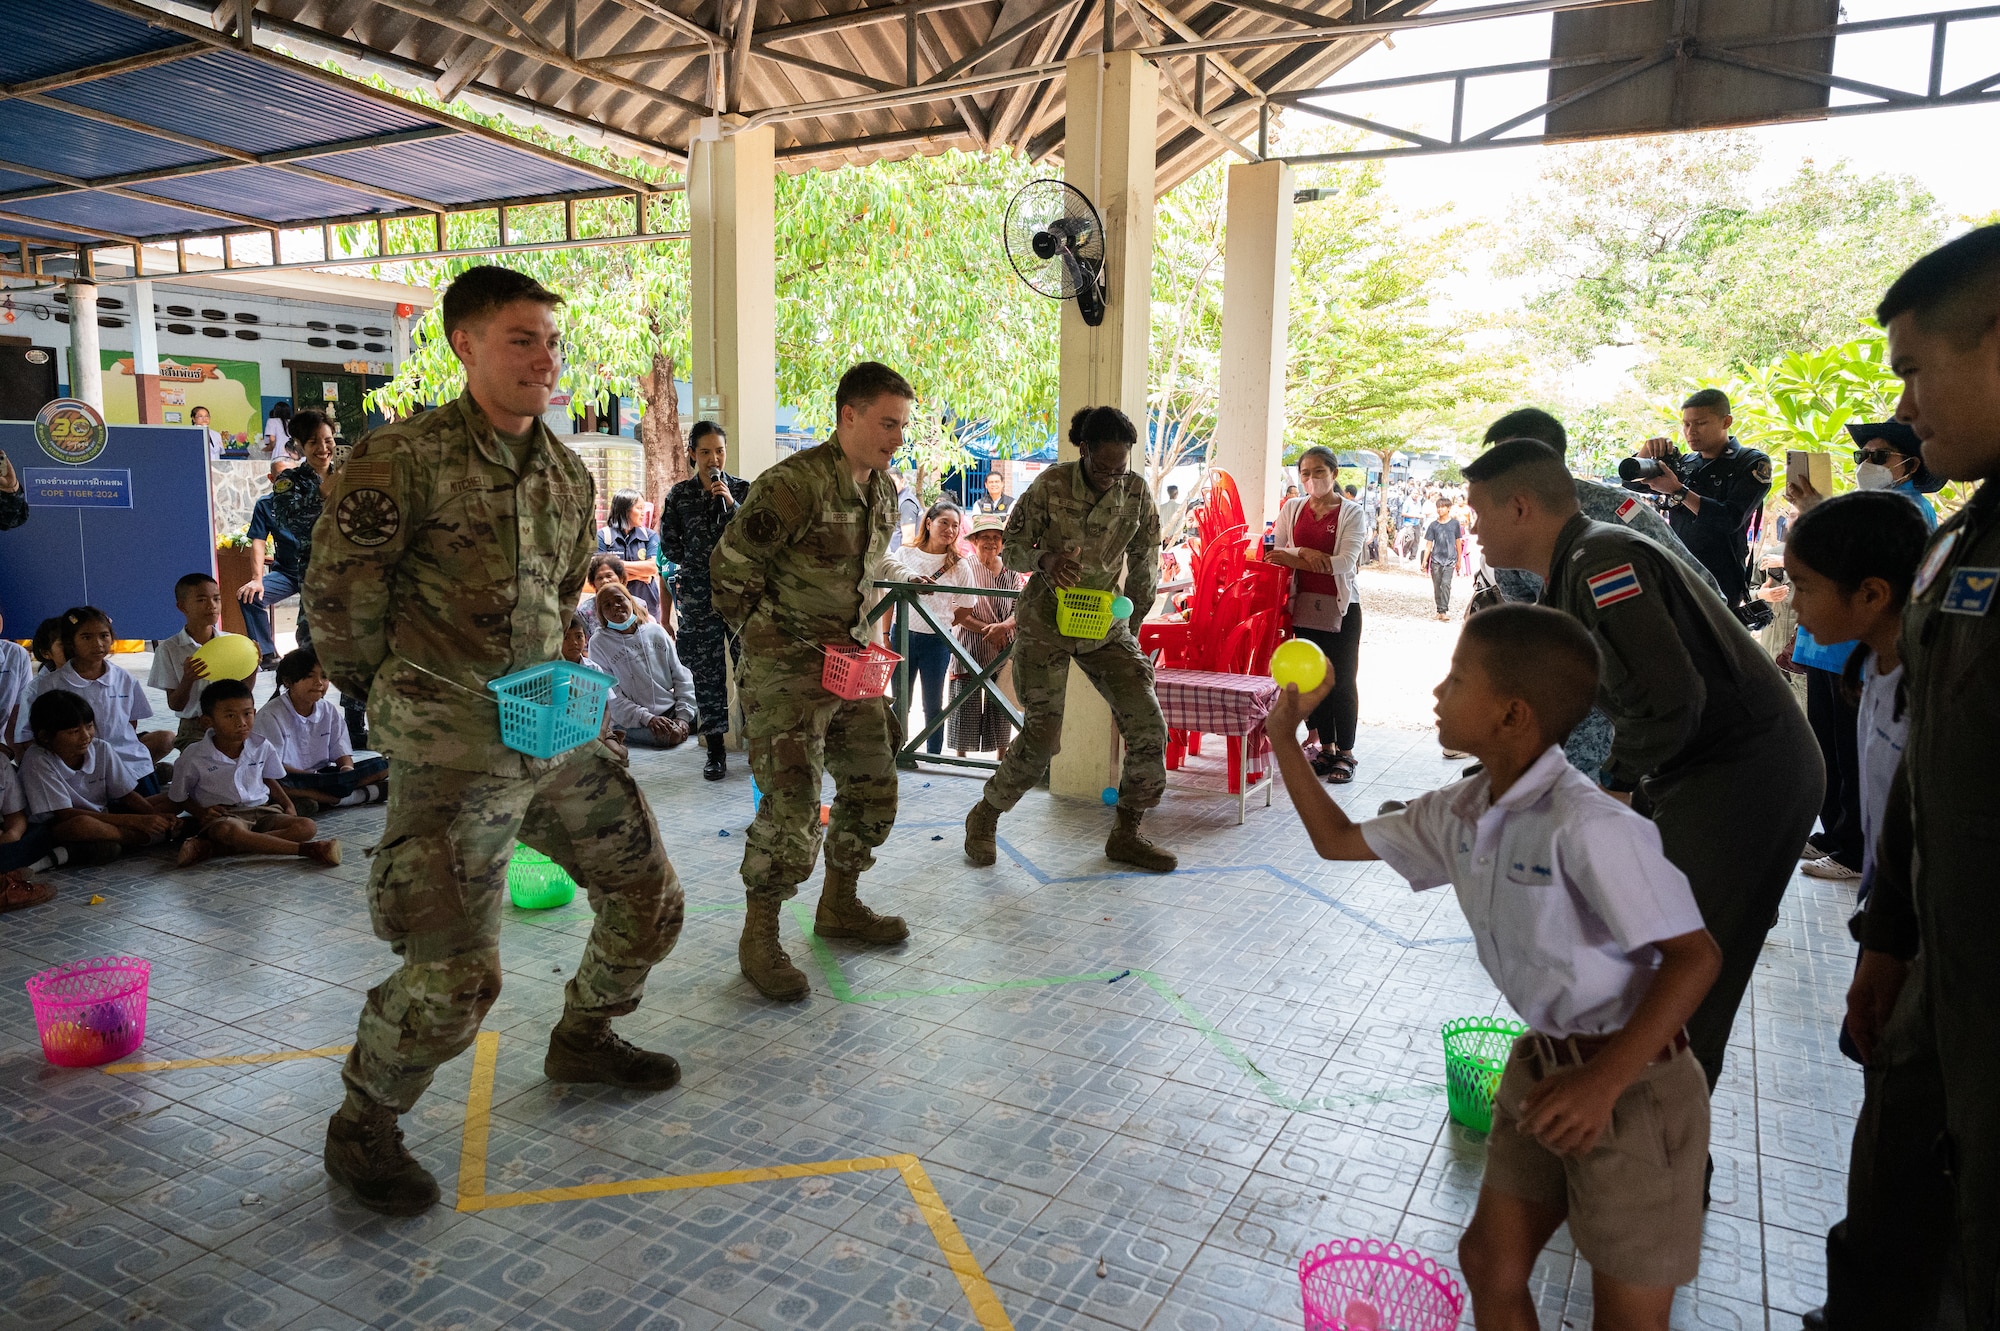 U.S. Air Force Airmen from the 356th Fighter Generation Squadron out of Eielson Air Force Base, Alaska, participate in a ball toss game during a community outreach event for Cope Tiger 2024, Ban Krok Duan Ha School, Nakhon Ratchasima Province, Thailand, March 21, 2024. The event was part of Cope Tiger which is an annual trilateral aerial exercise meant to enhance readiness and further develop interoperability. (U.S. Air Force photo by Tech. Sgt. Hailey Haux)